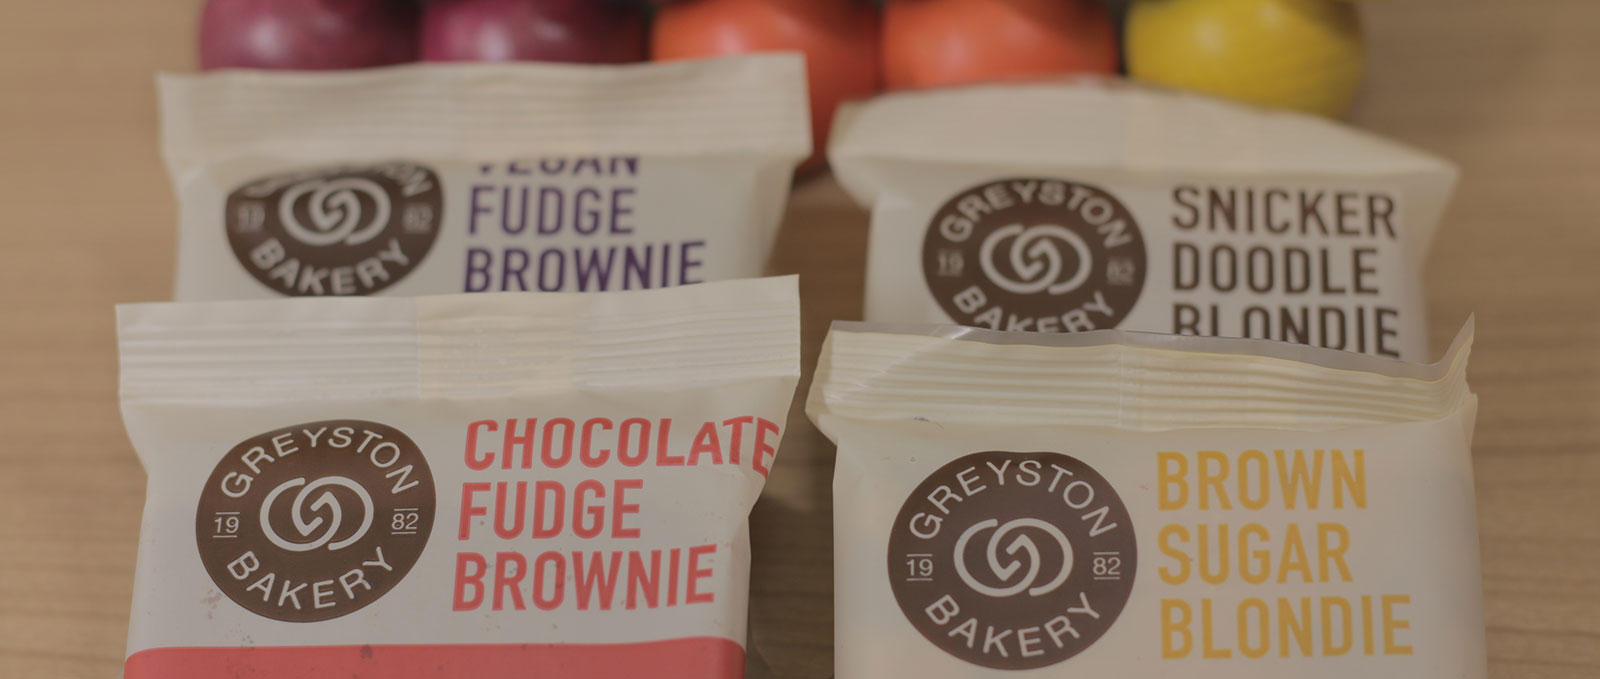 SnackDot: Greyston Bakery’s Brownies